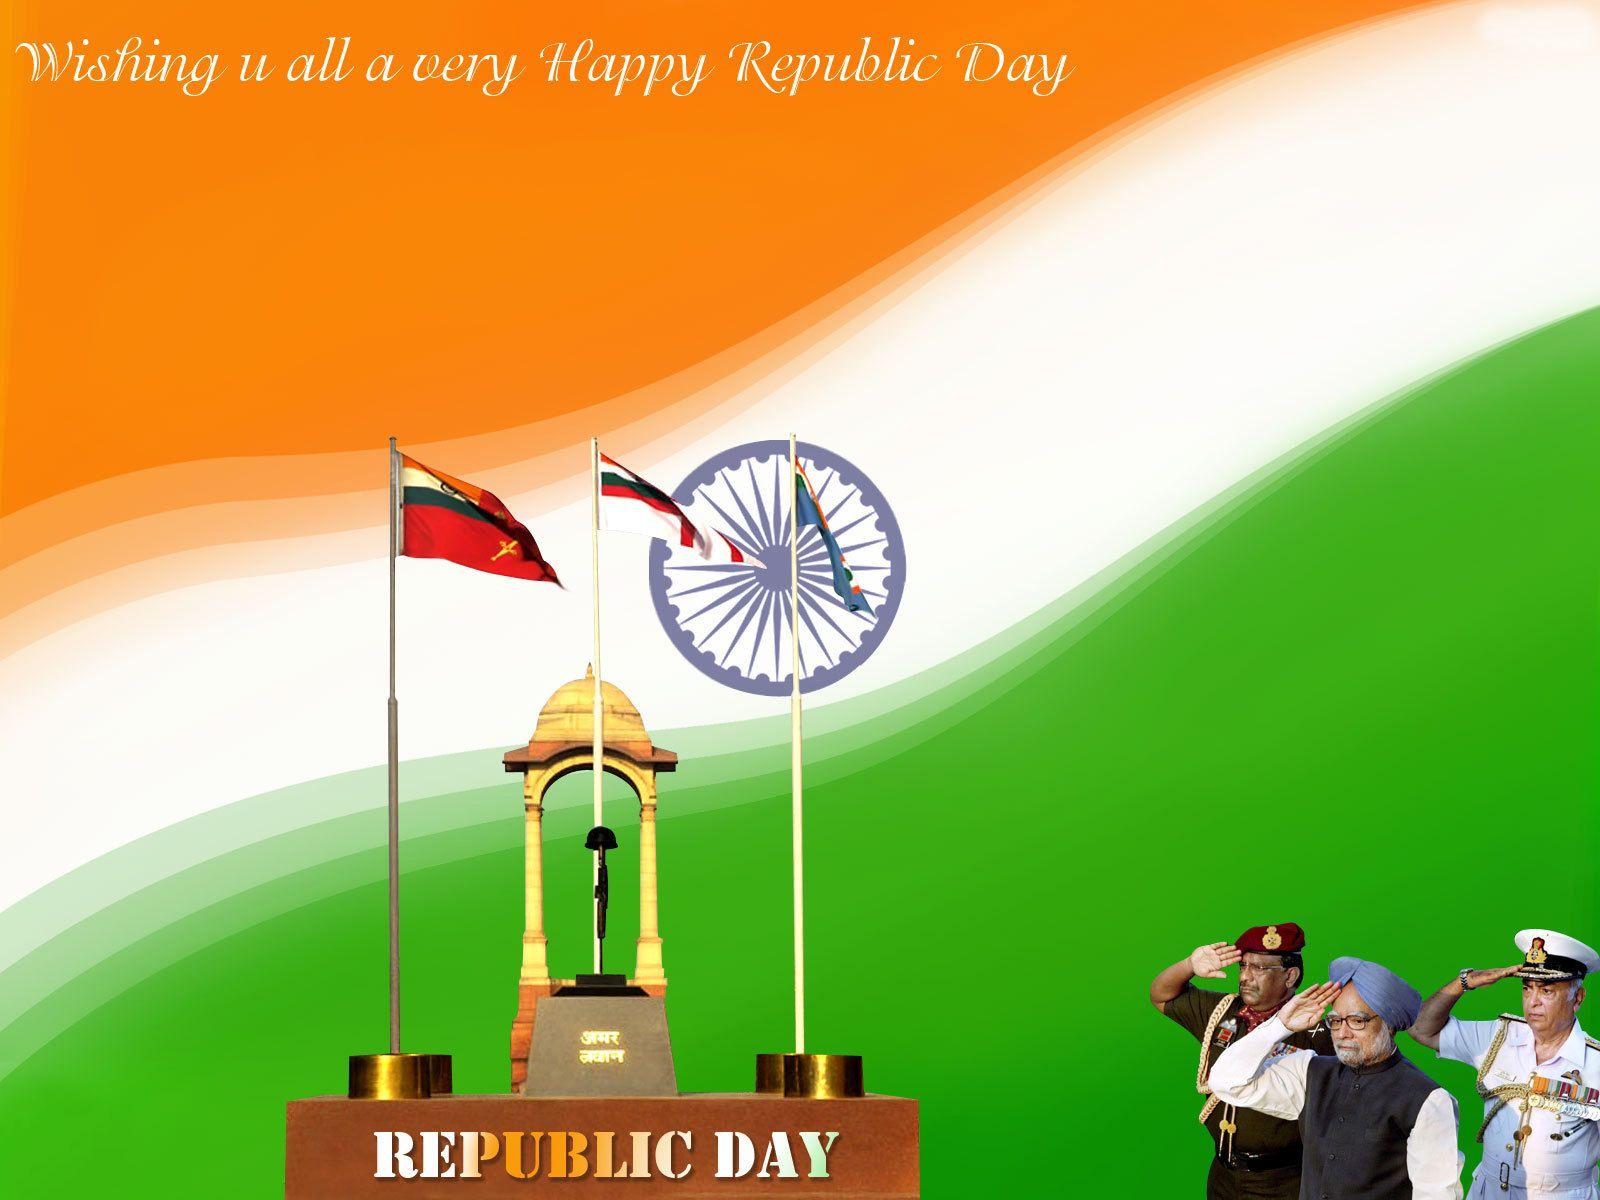 26th January India Republic Day HD Wallpapers 26 Jan Backgrounds Free  Download